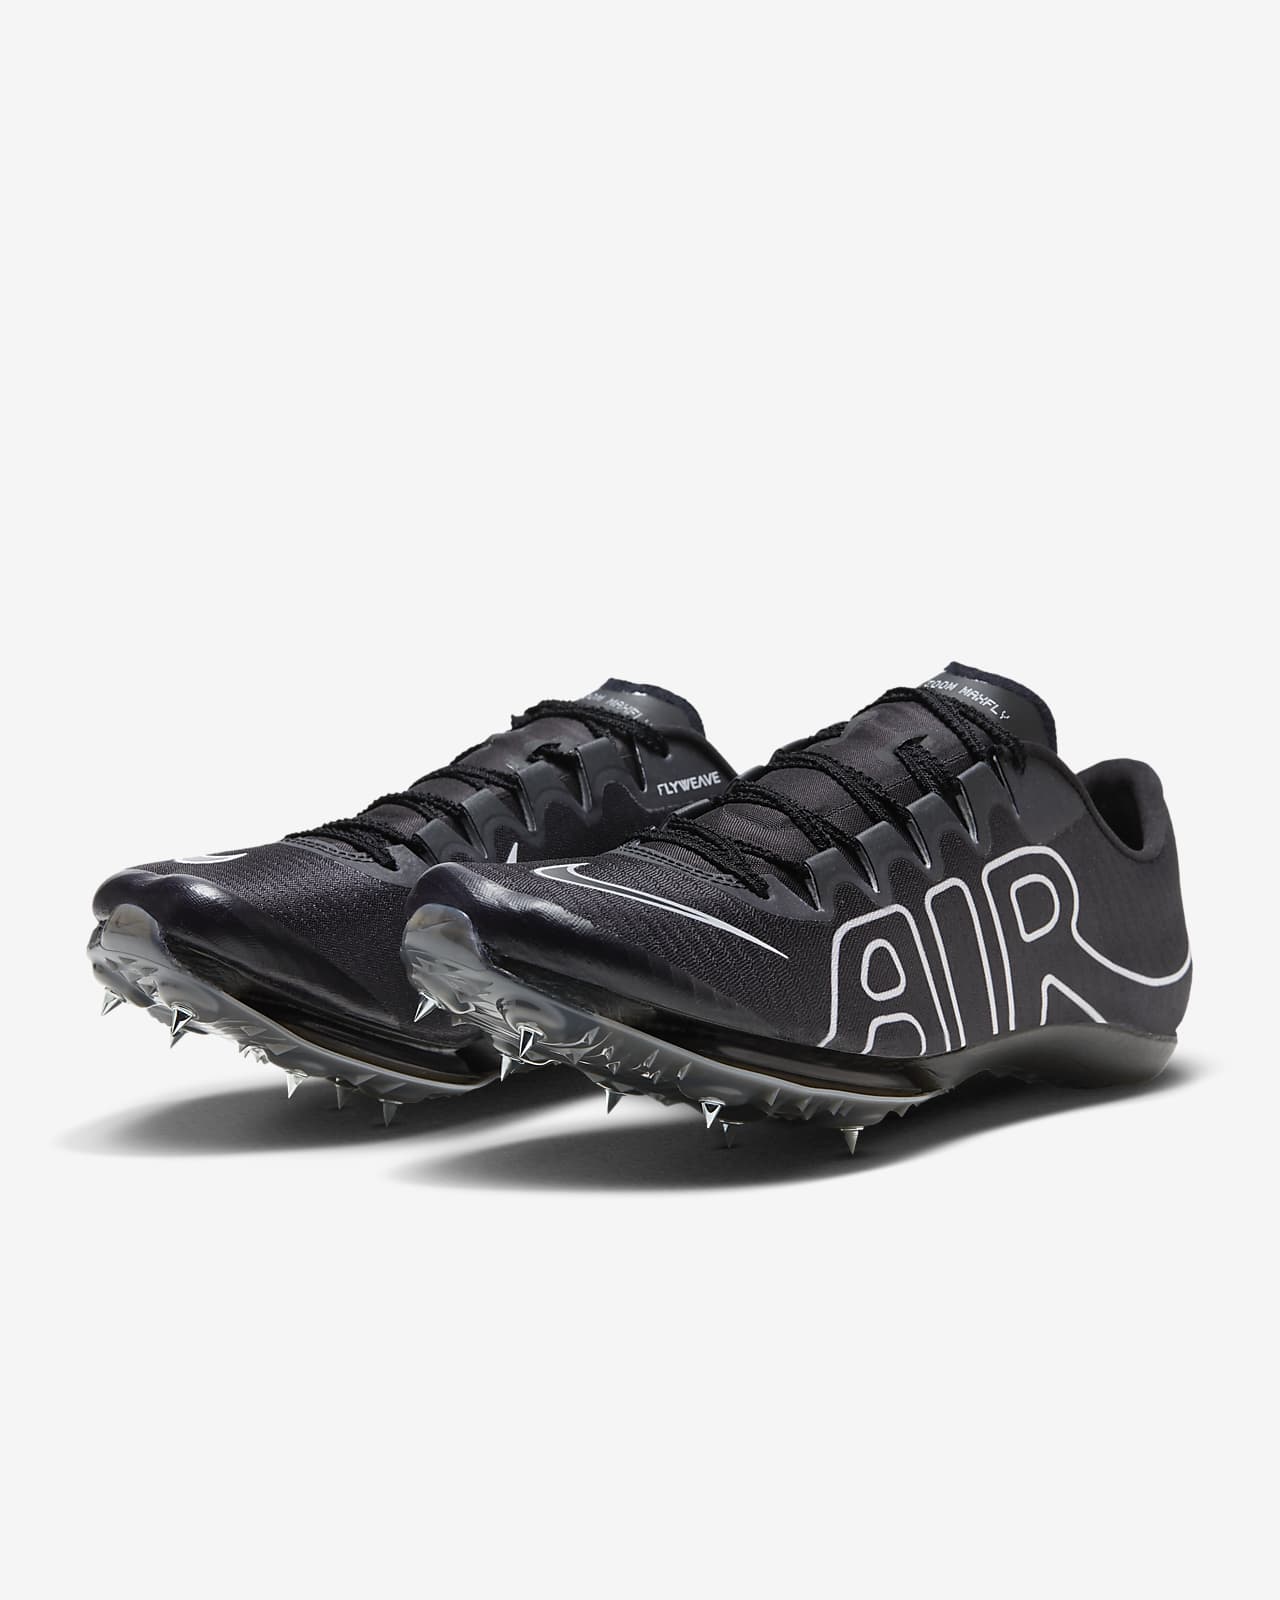 Nike Air Zoom Maxfly More Uptempo Athletics Sprinting Spikes